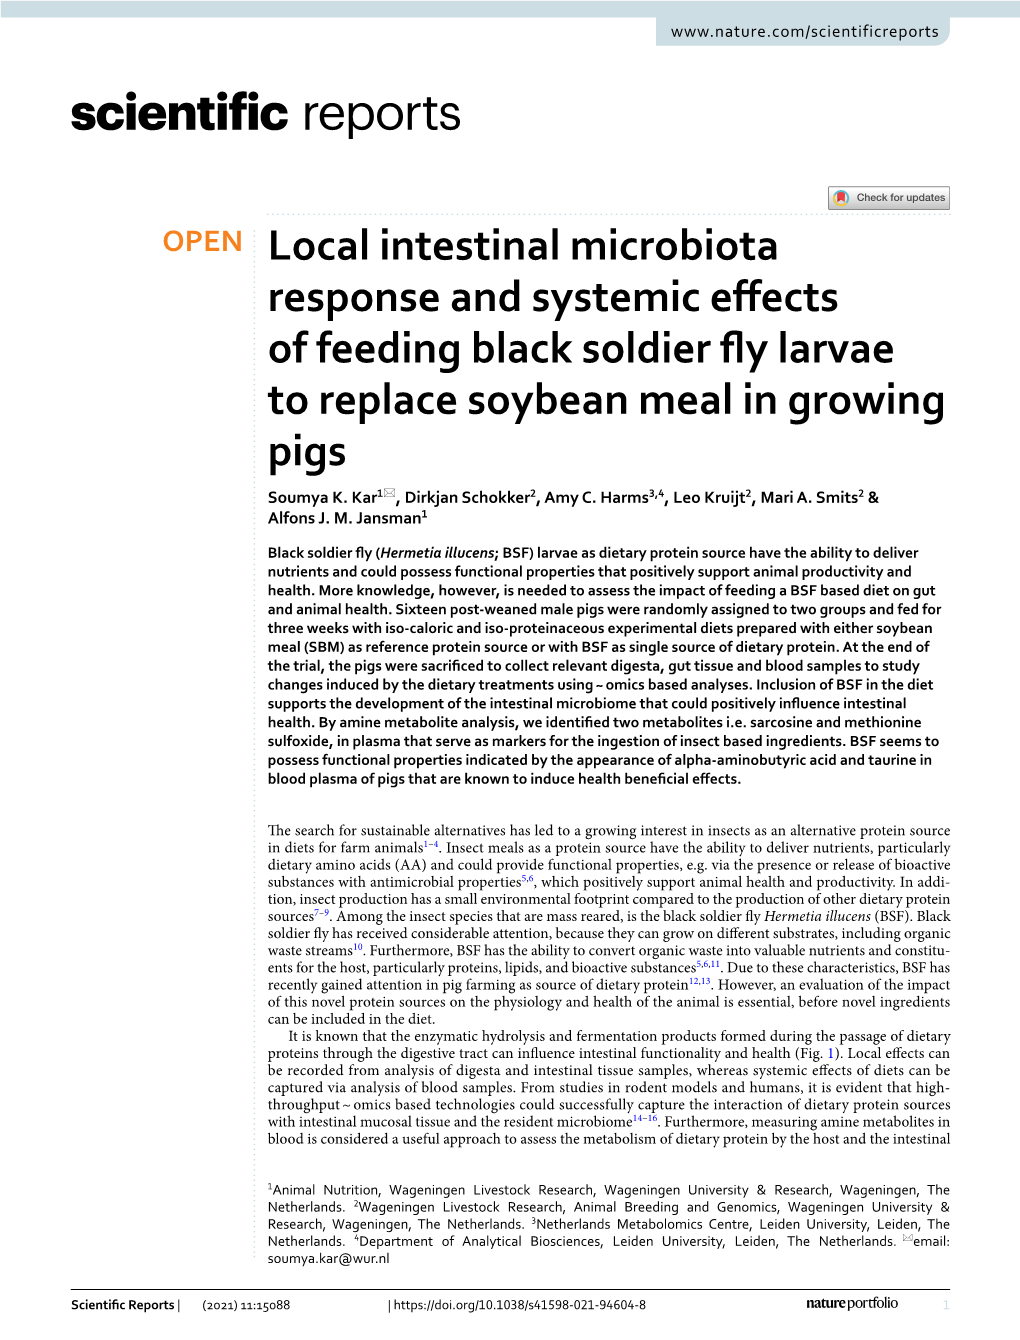 Local Intestinal Microbiota Response and Systemic Effects of Feeding Black Soldier Fly Larvae to Replace Soybean Meal in Growing